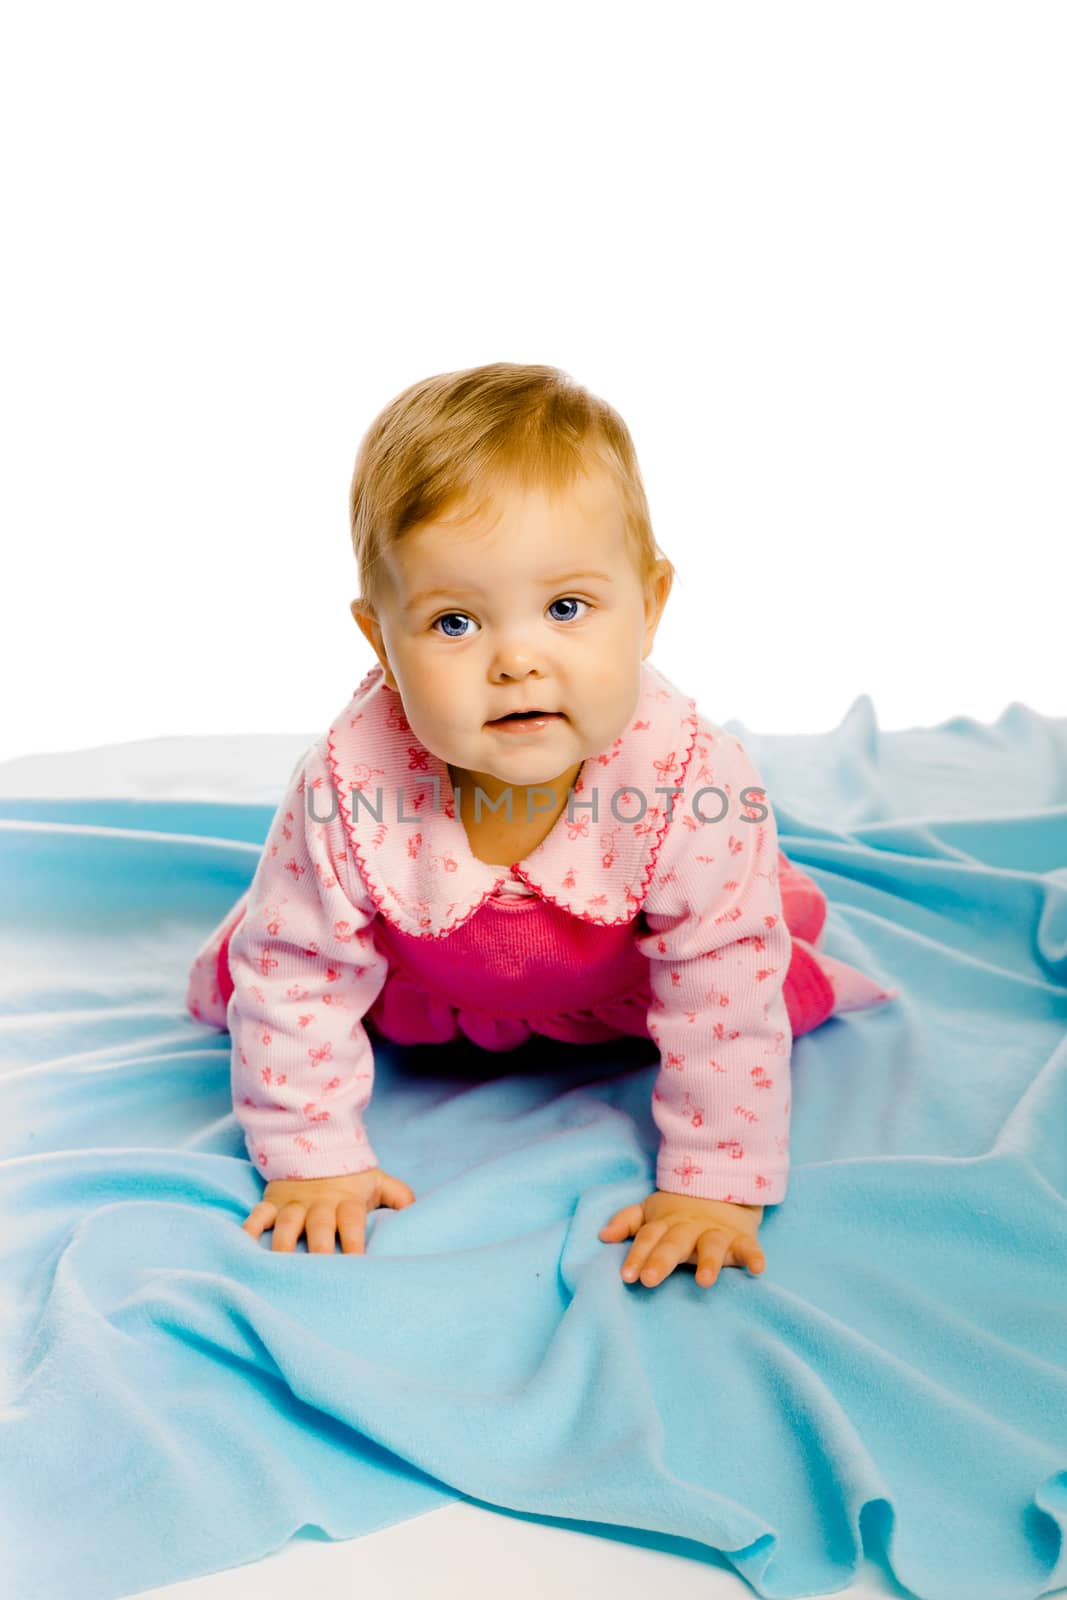 Beautiful baby girl crawling on the blue coverlet. Studio